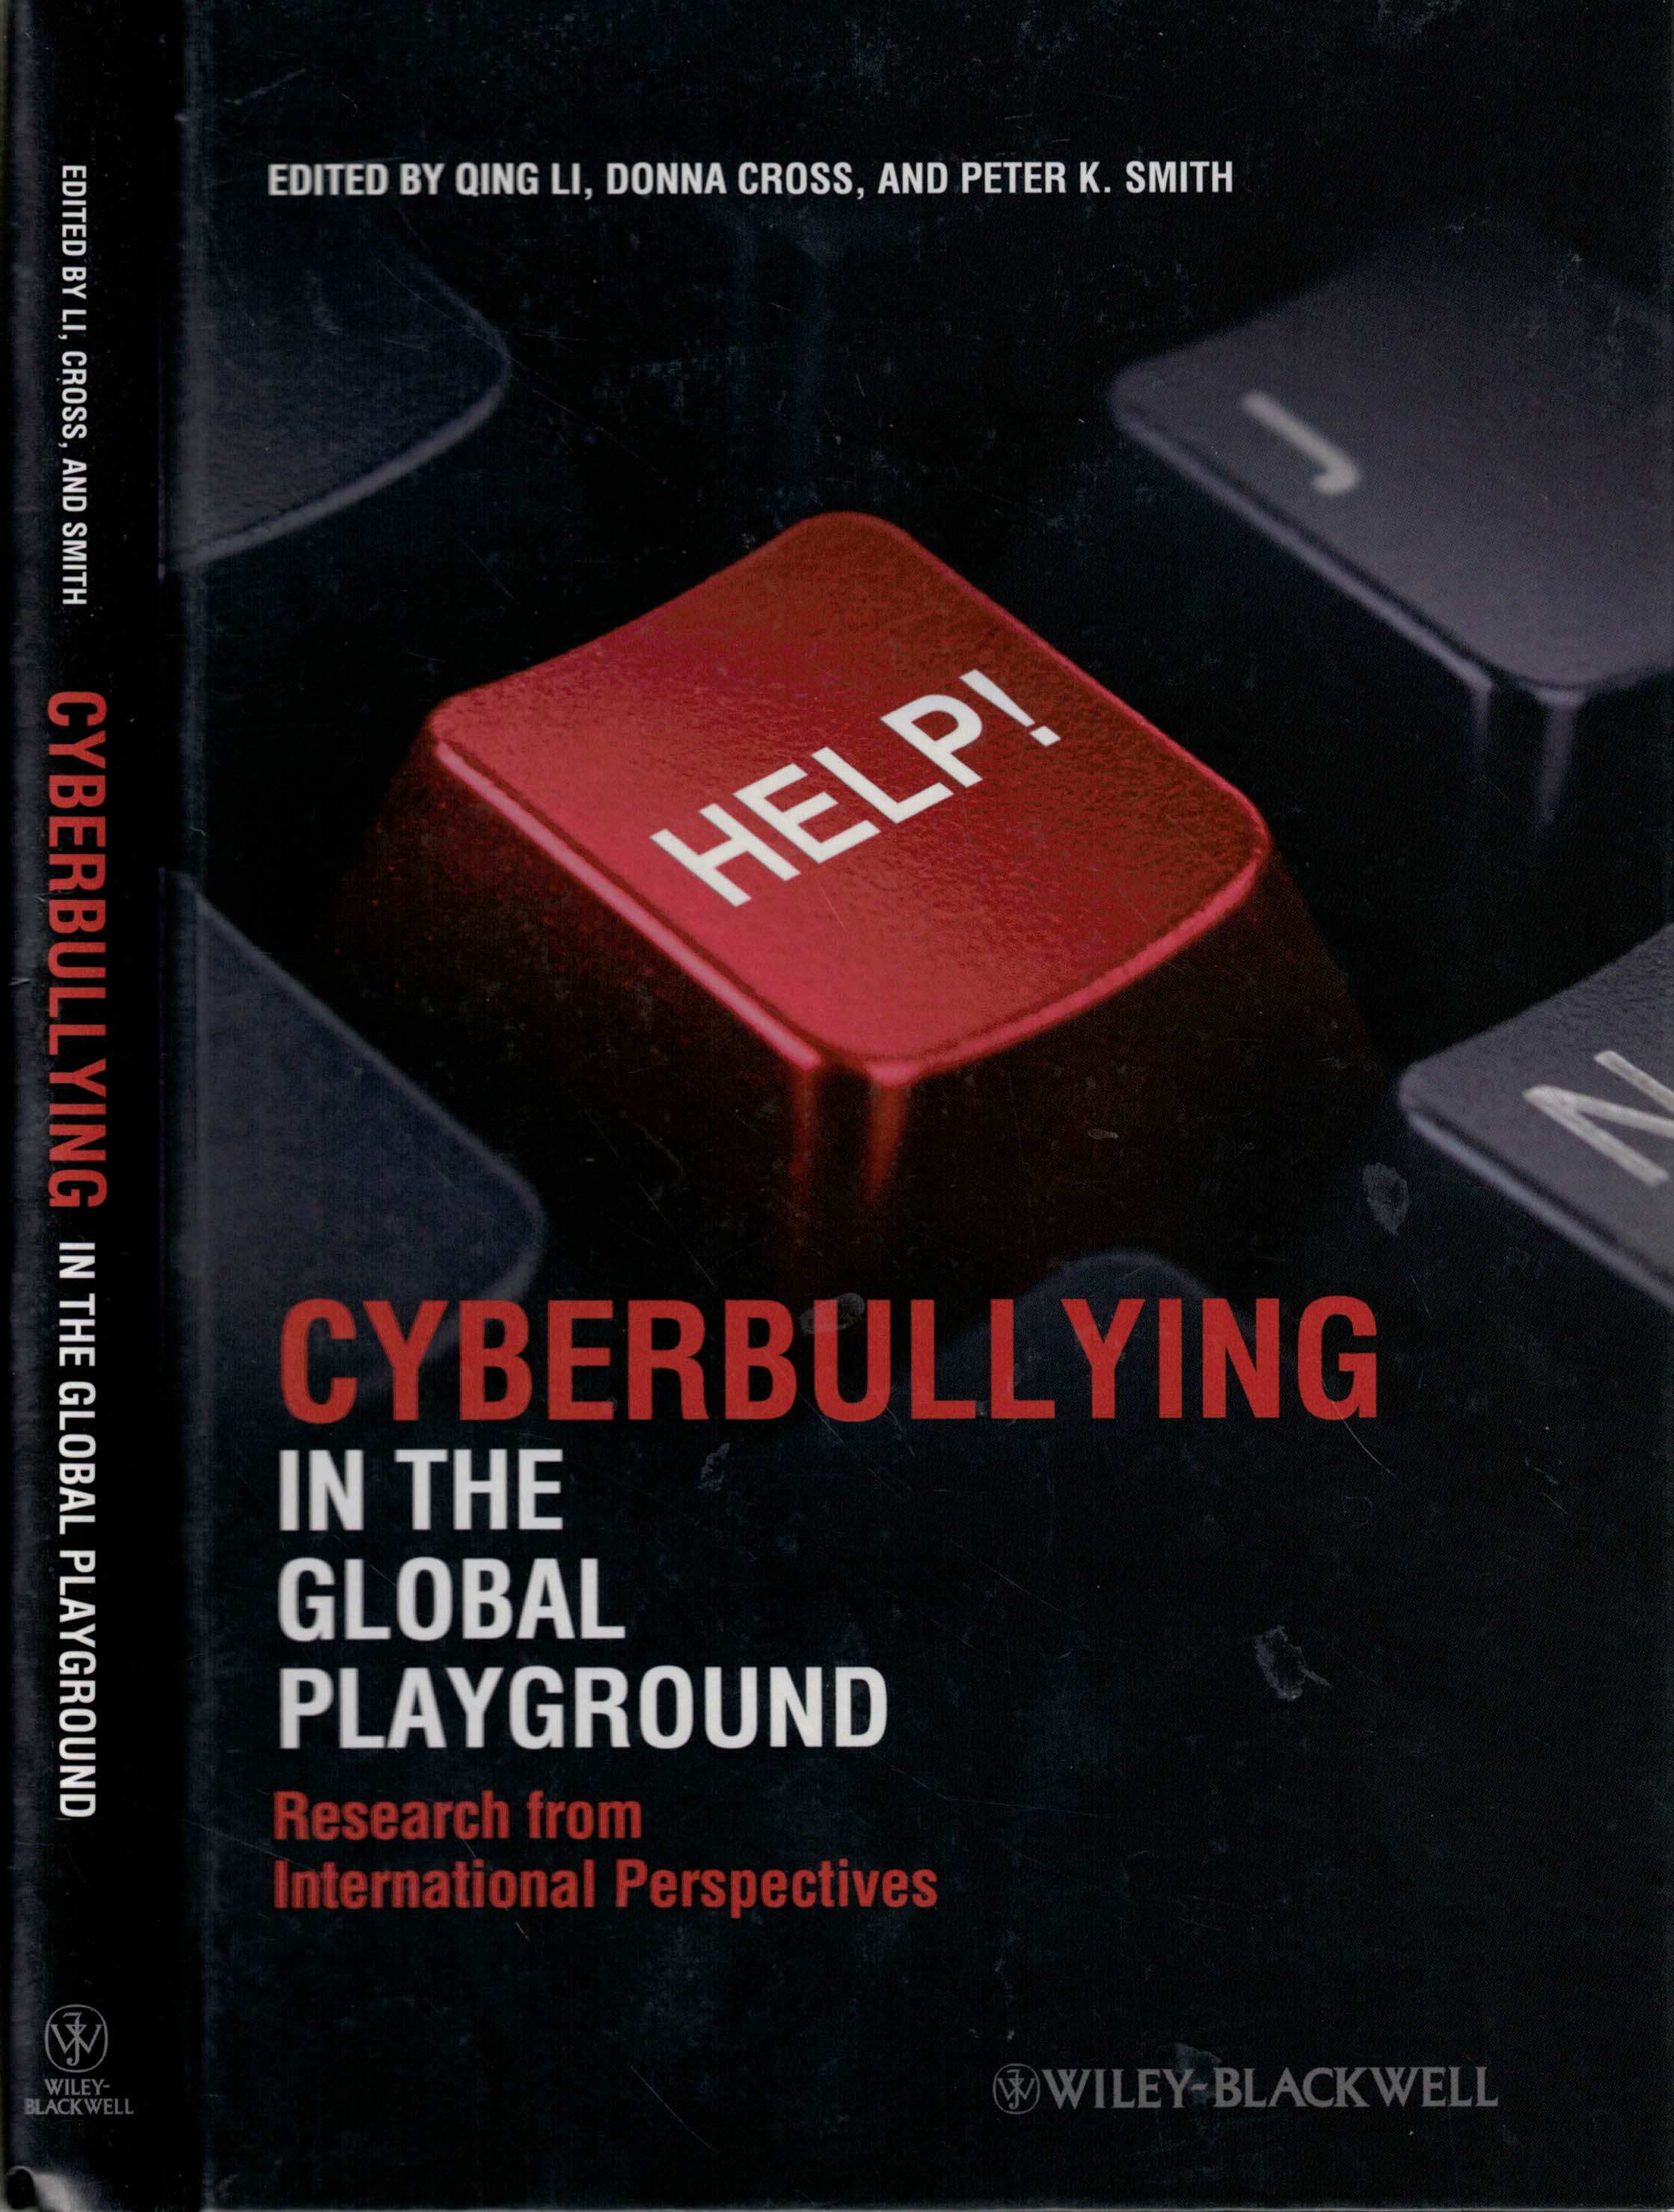 Cyberbullying in the Global Playground. Research from International Perspectives.